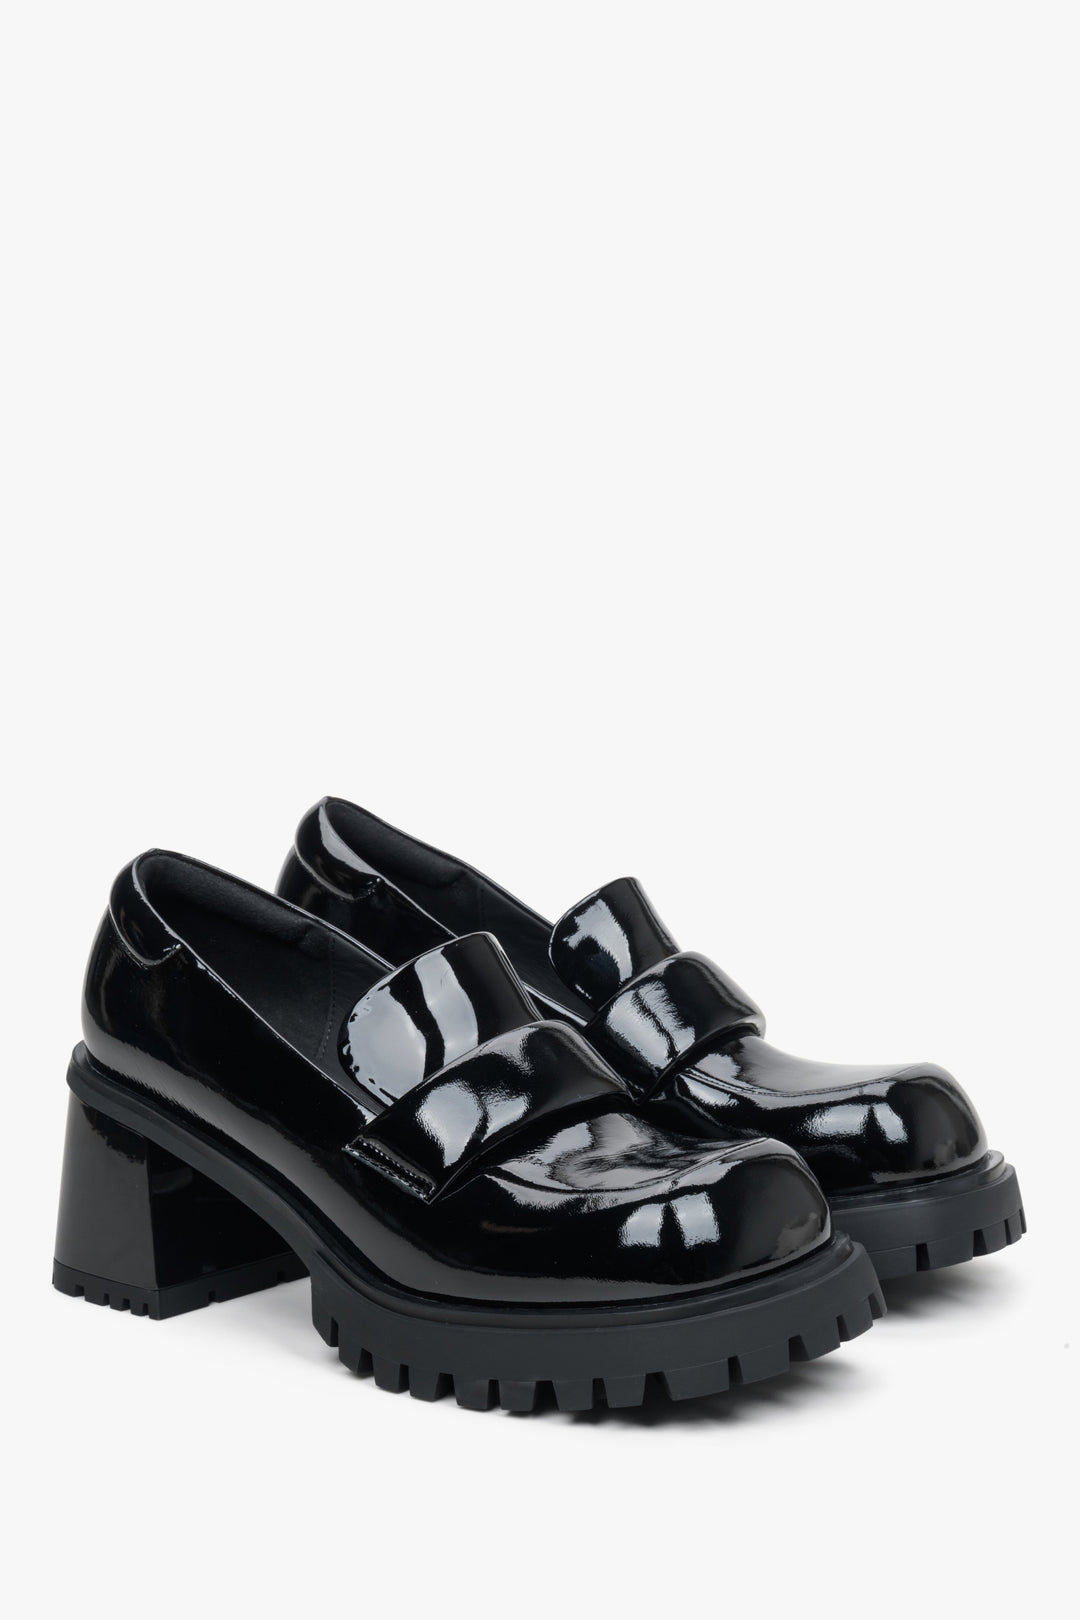 Women's black heeled loafers made of patent genuine leather by Estro.